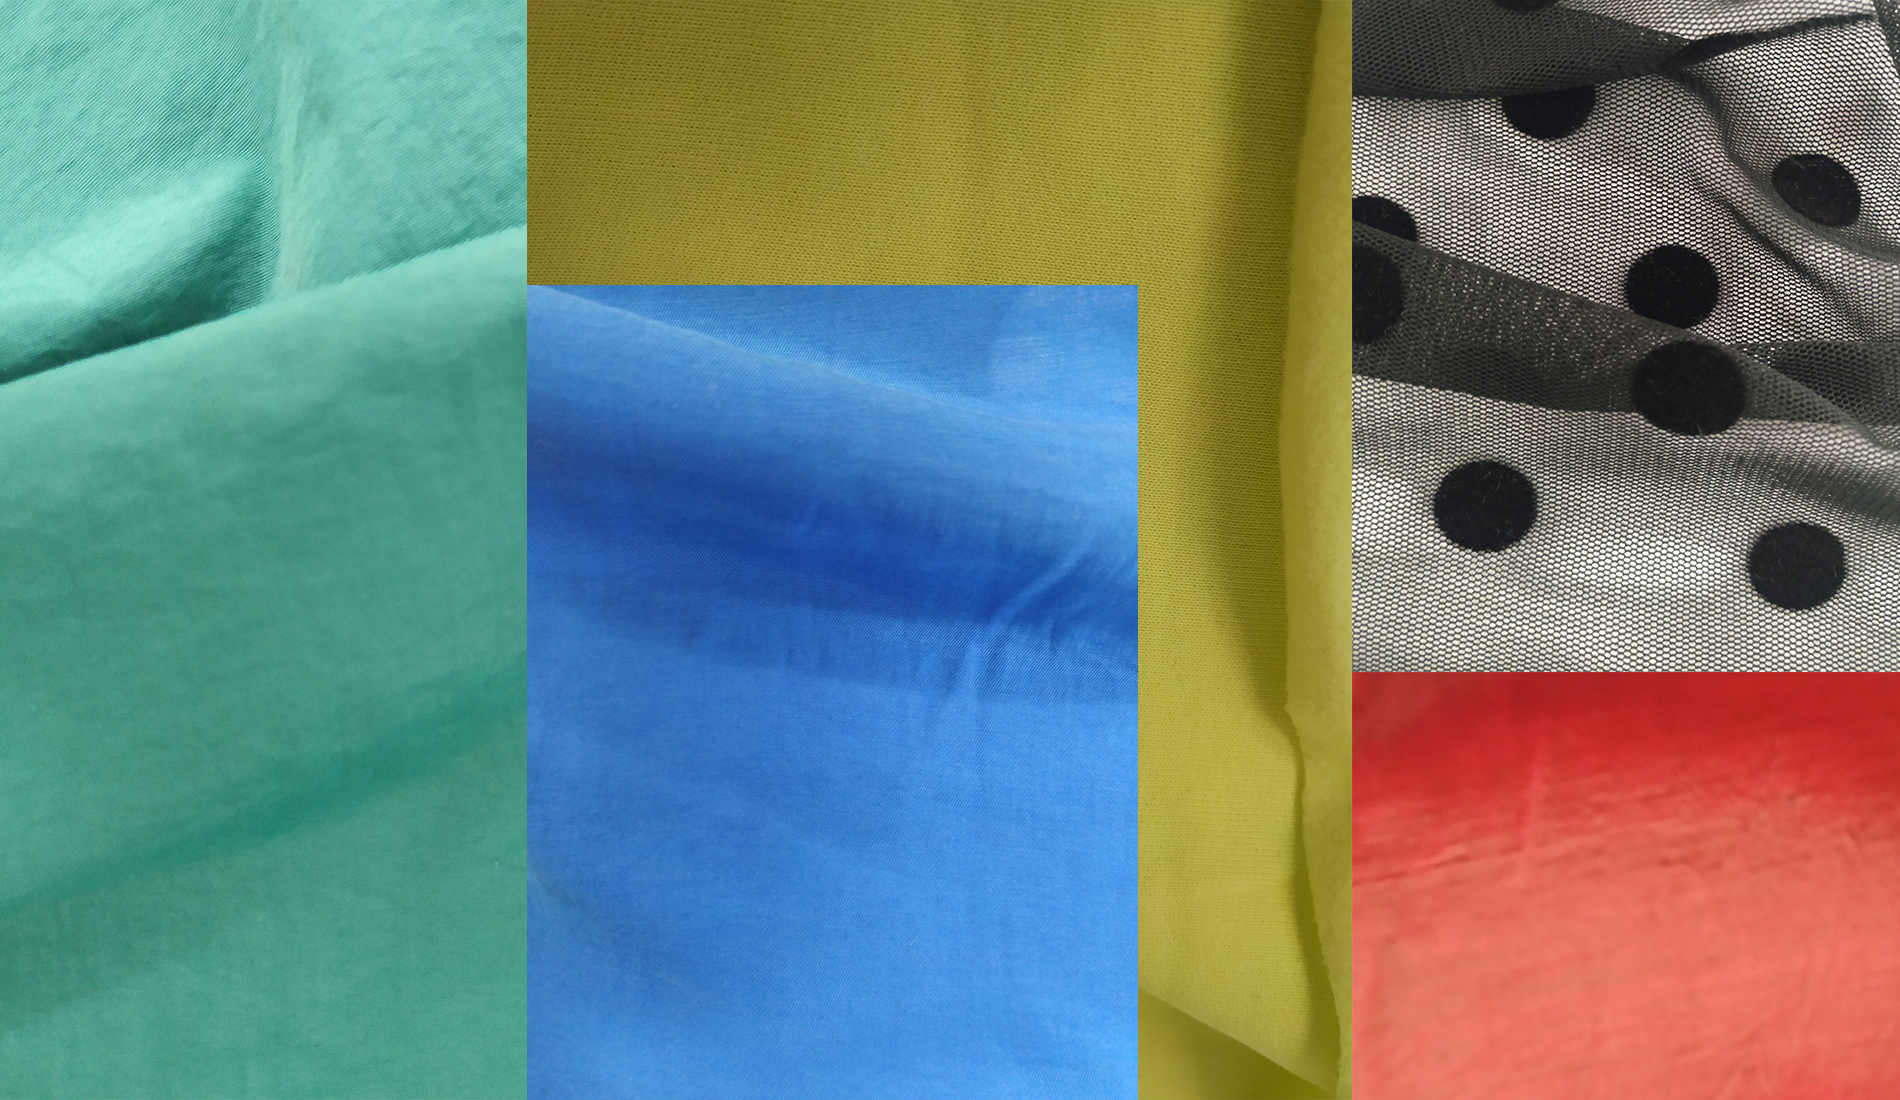 Montage of colourful fabrics